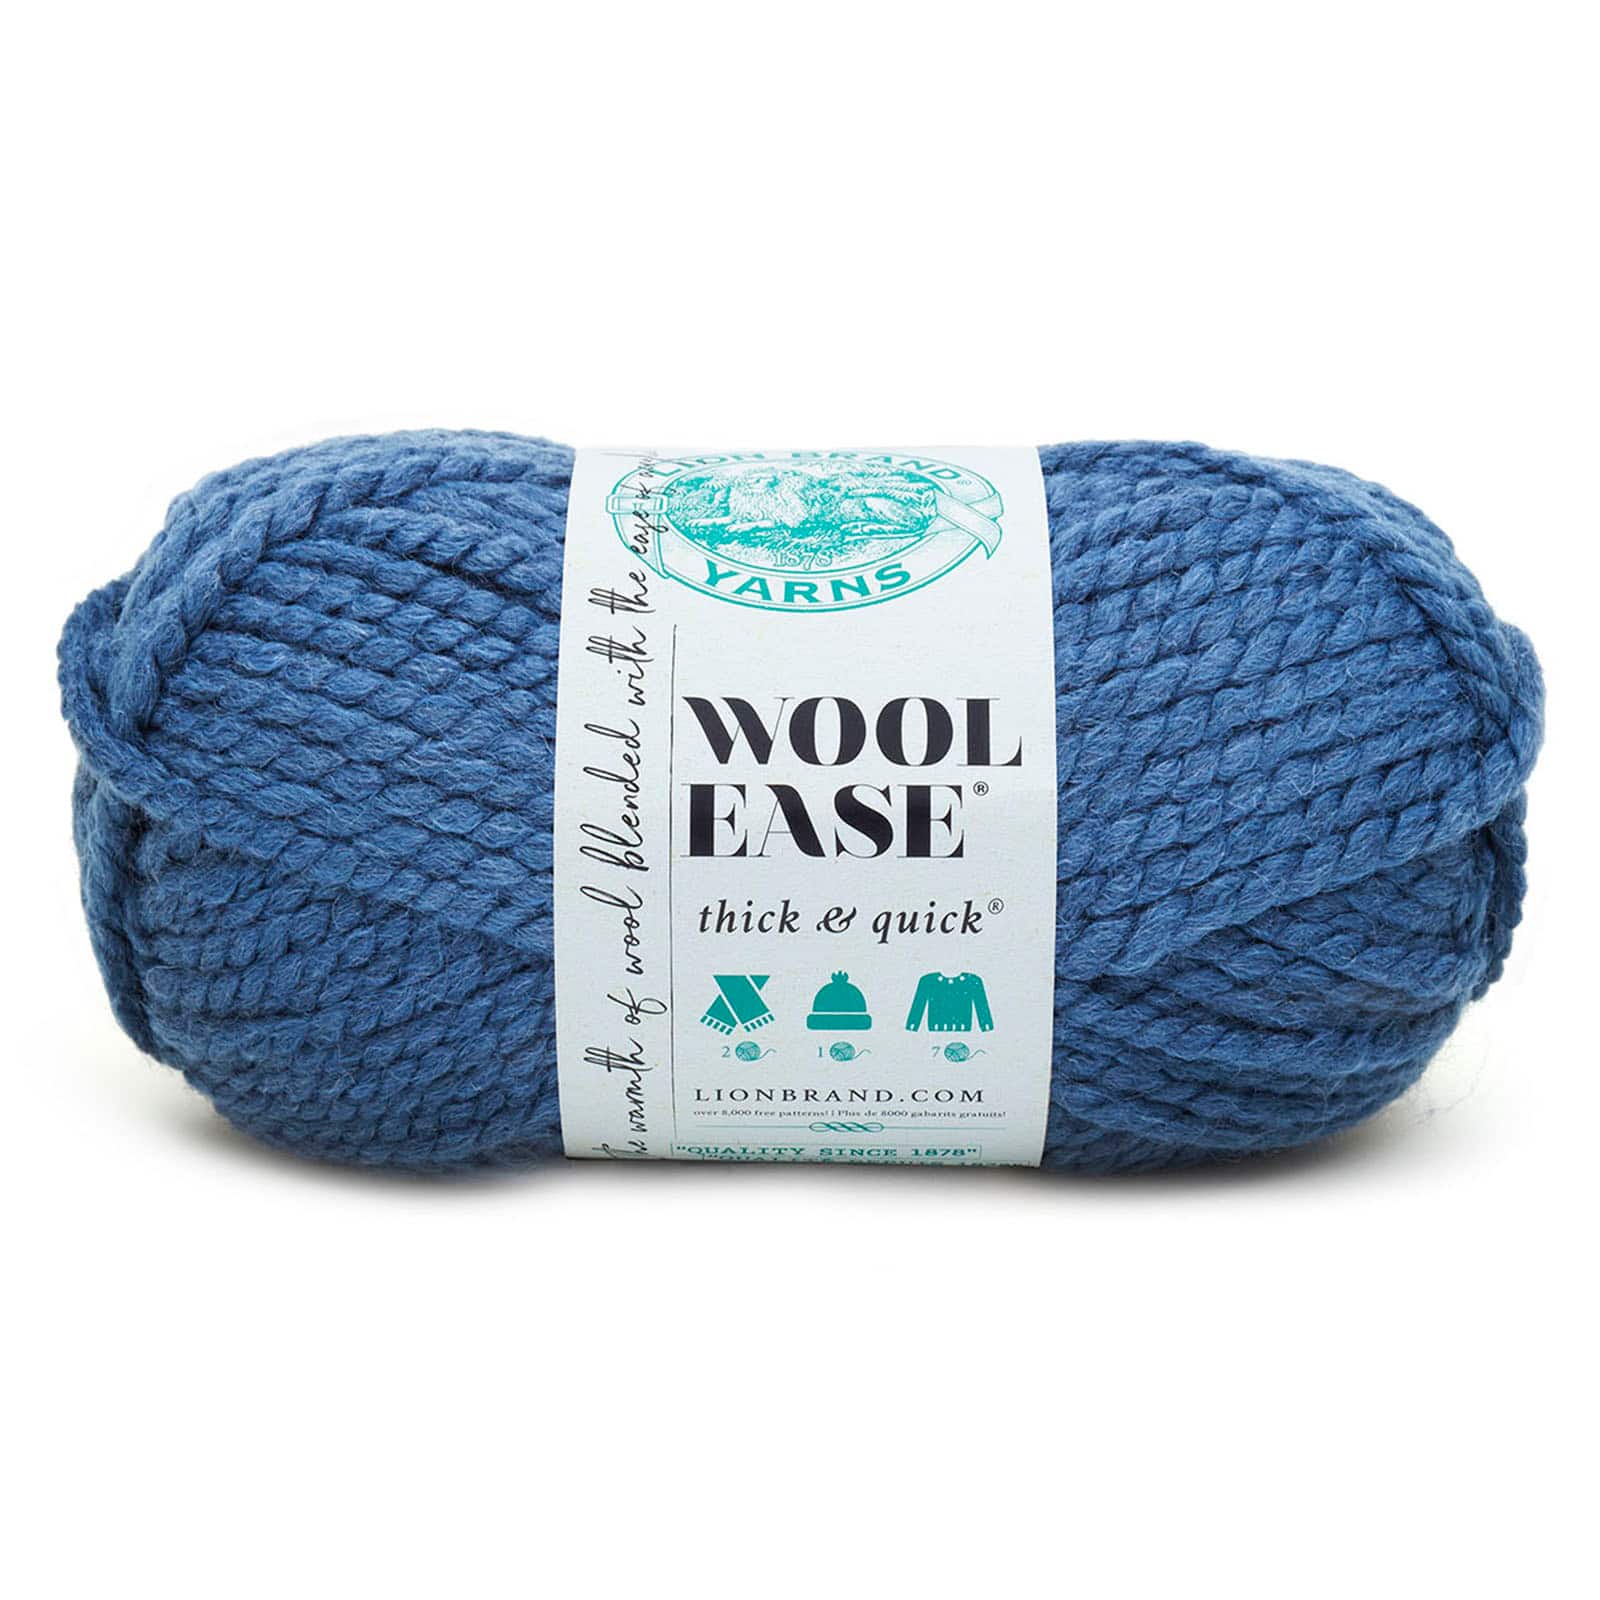 LION BRAND WOOL Ease Thick and Quick Yarn Blossom 6 Oz/170g 106 Yd/97 M  Super Bulky 6 -  Canada